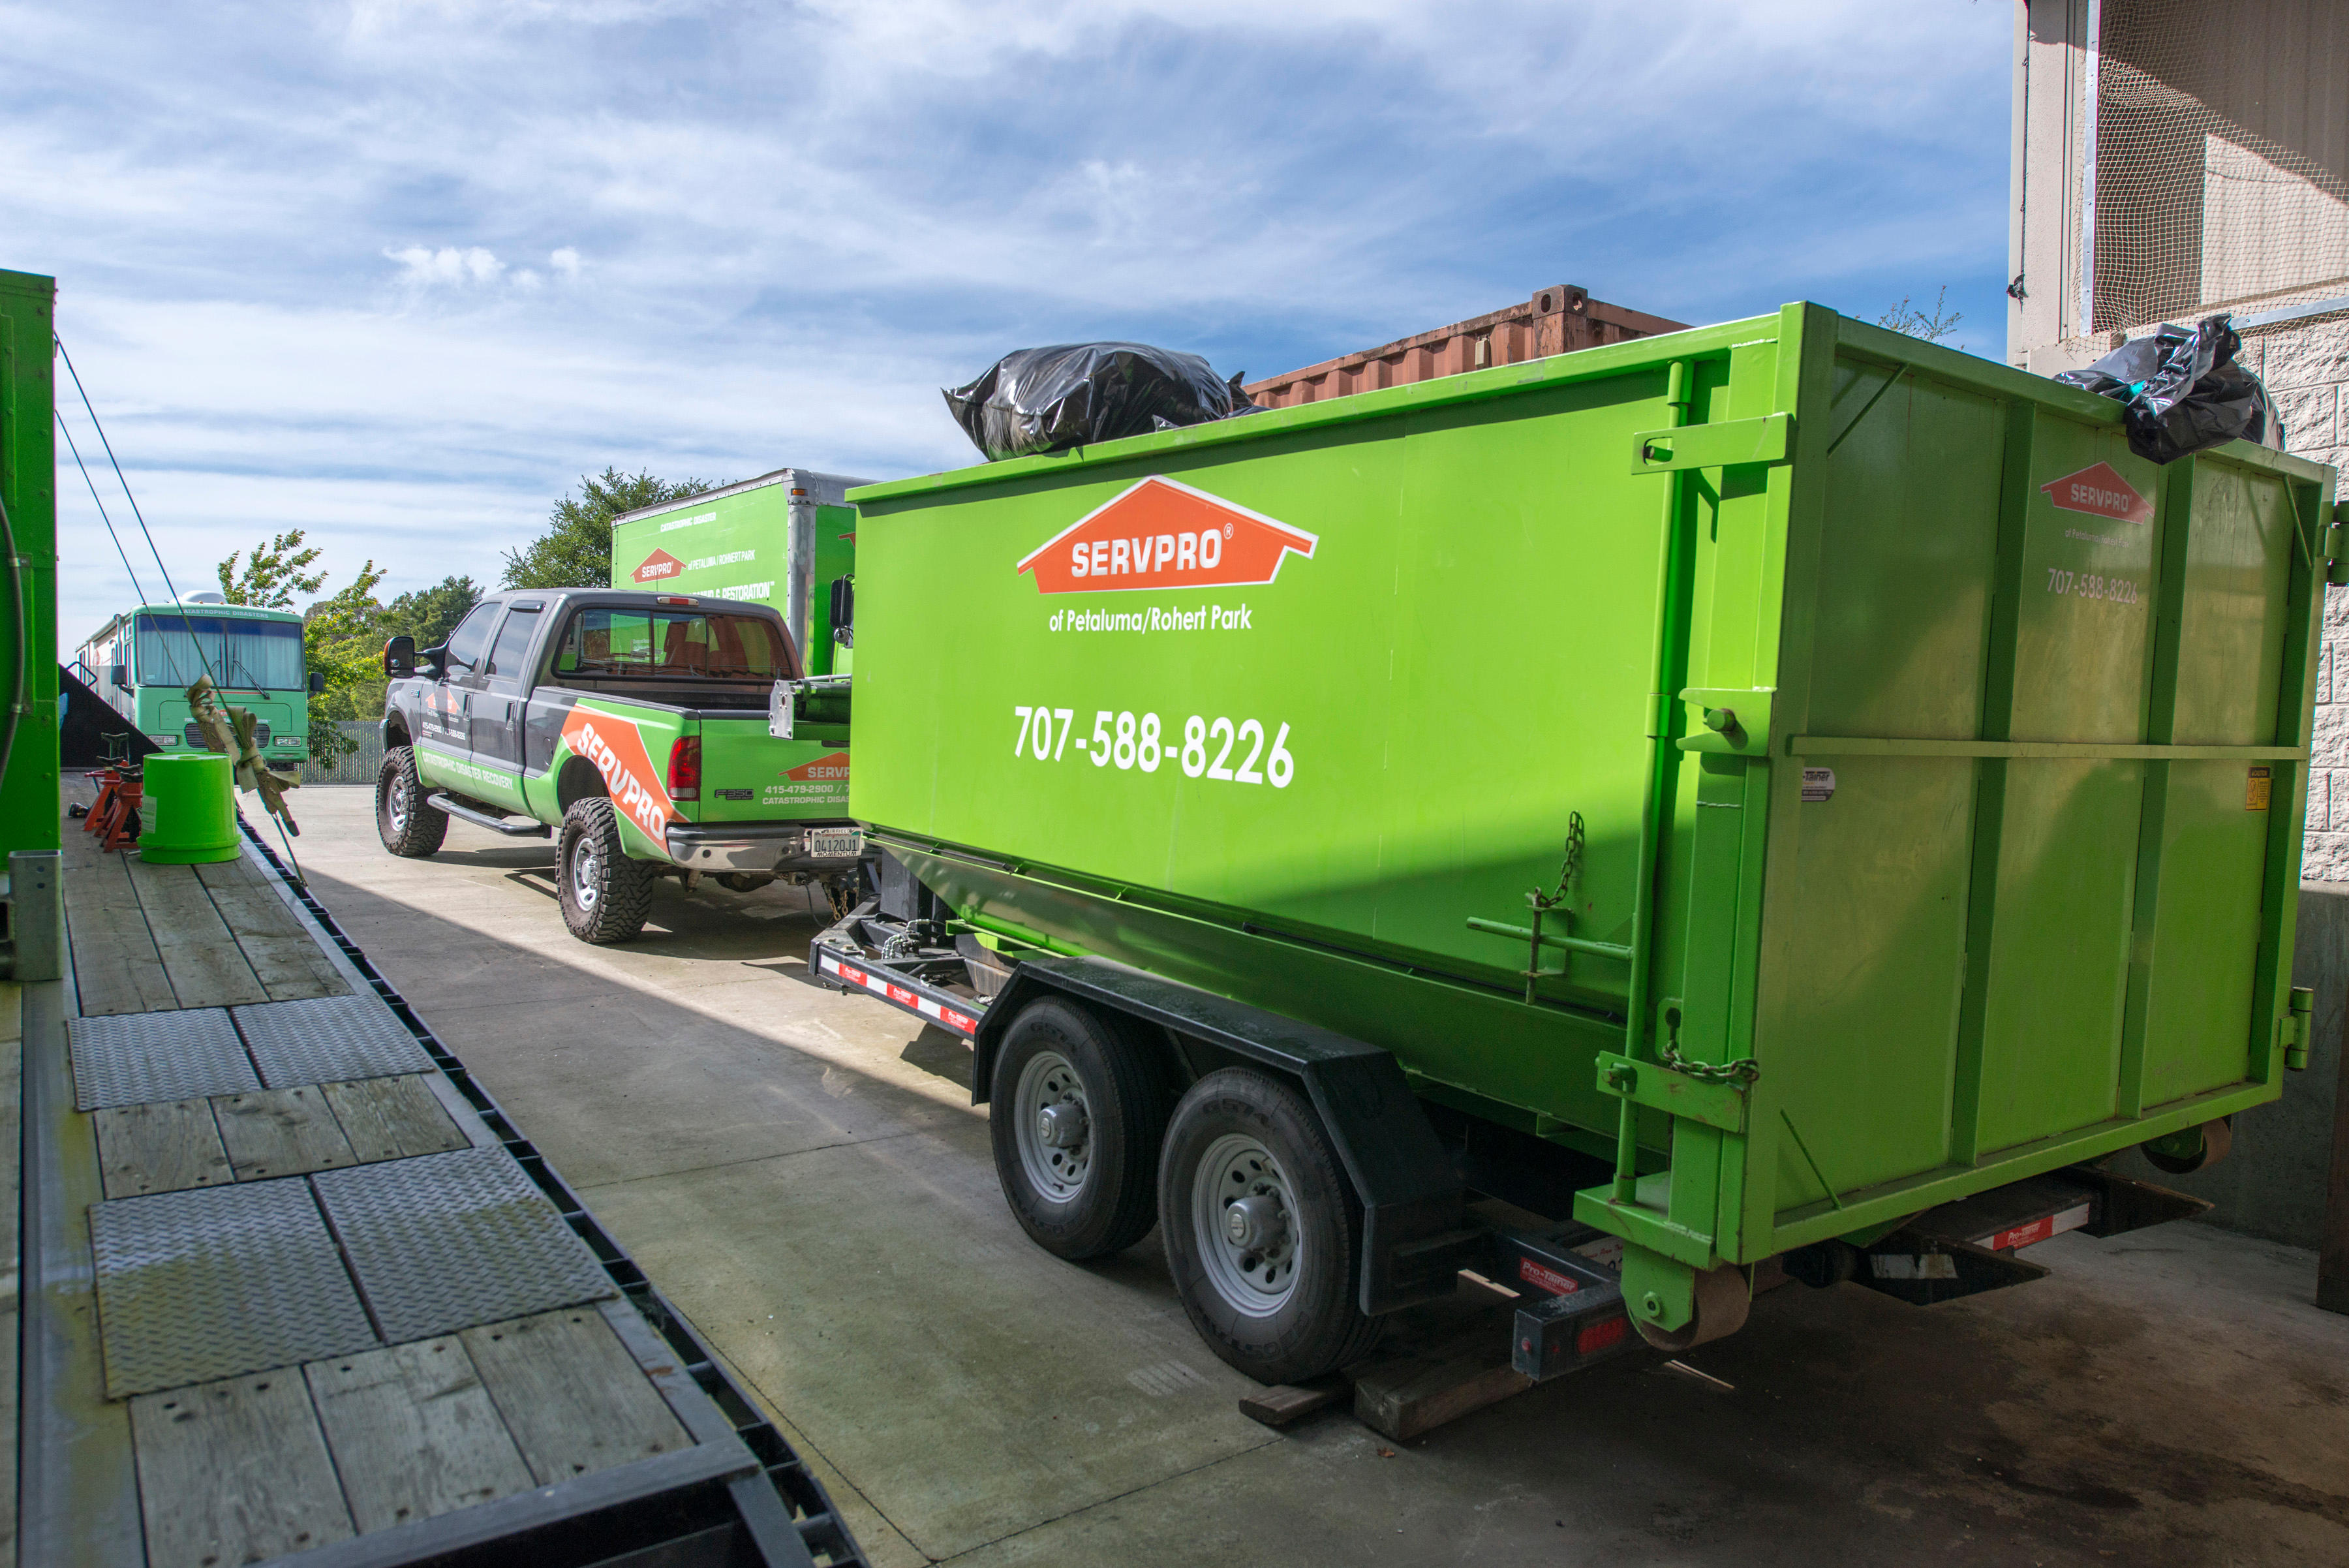 SERVPRO of Petaluma/Rohnert Park/Santa Rosa truck and trailer used for water, fire, and smoke damage restoration services.